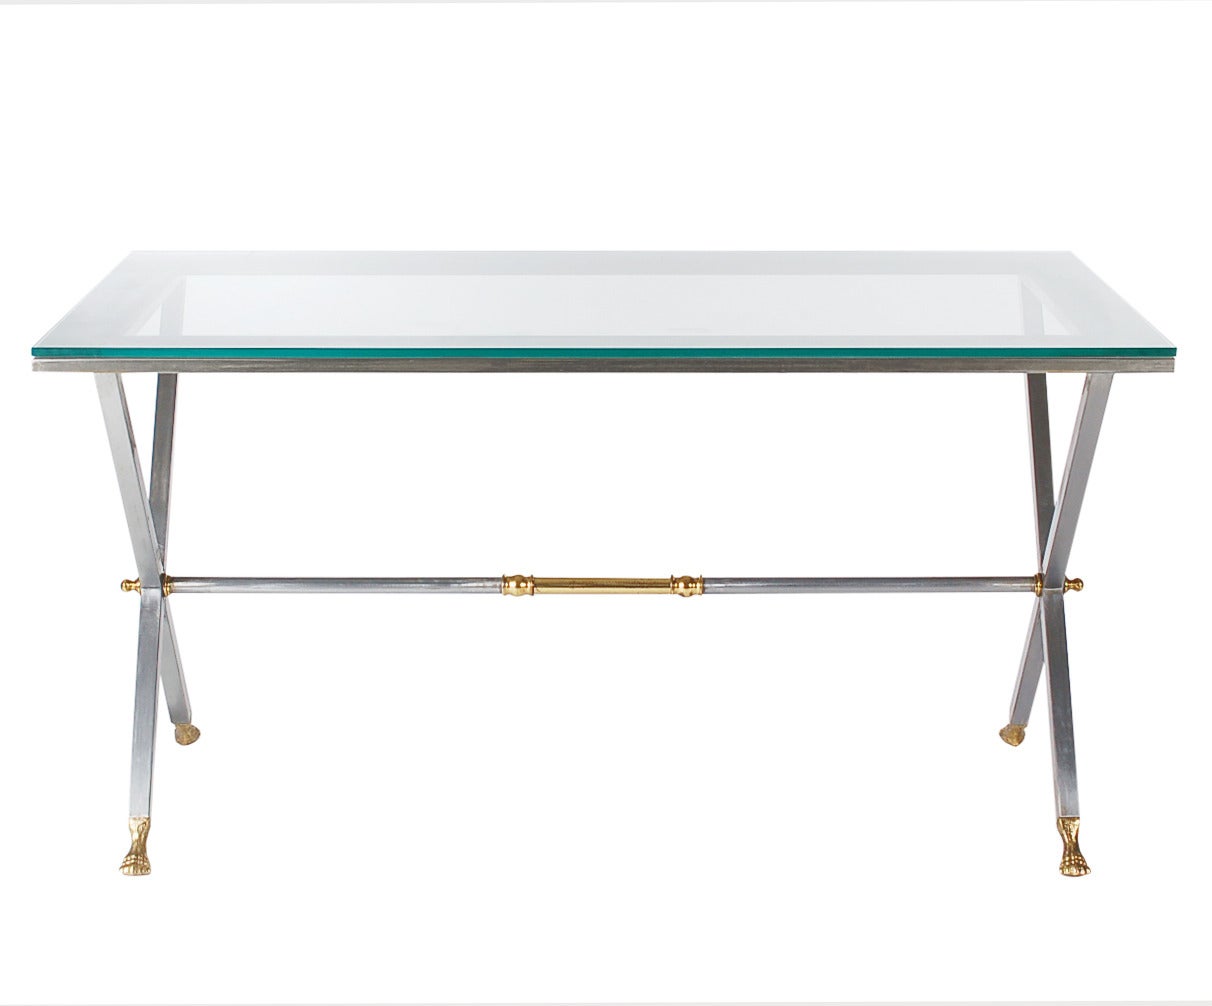 A modern, yet traditionally stylized piece of furniture. A truly versatile and chic looking table for any room of the house. It features a heavy steel frame with brass accents and glass top. It is very well made circa 1960s and marked Made in Italy.